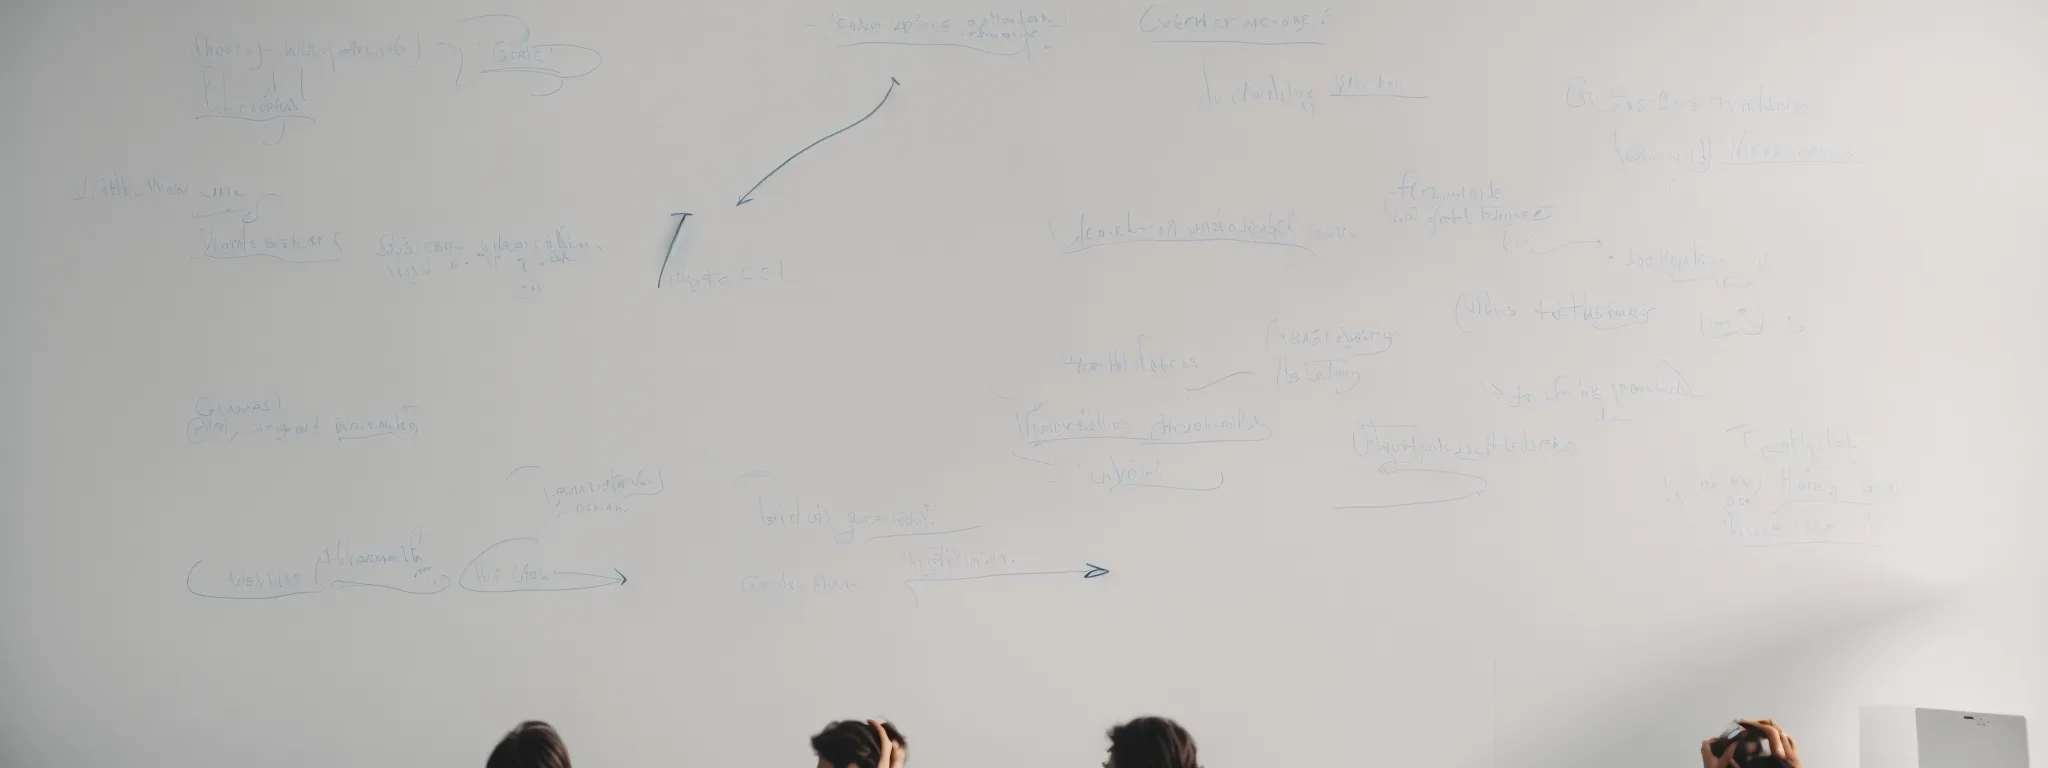 a brainstorming session with a minimalistic whiteboard and marker, outlining a streamlined business plan.